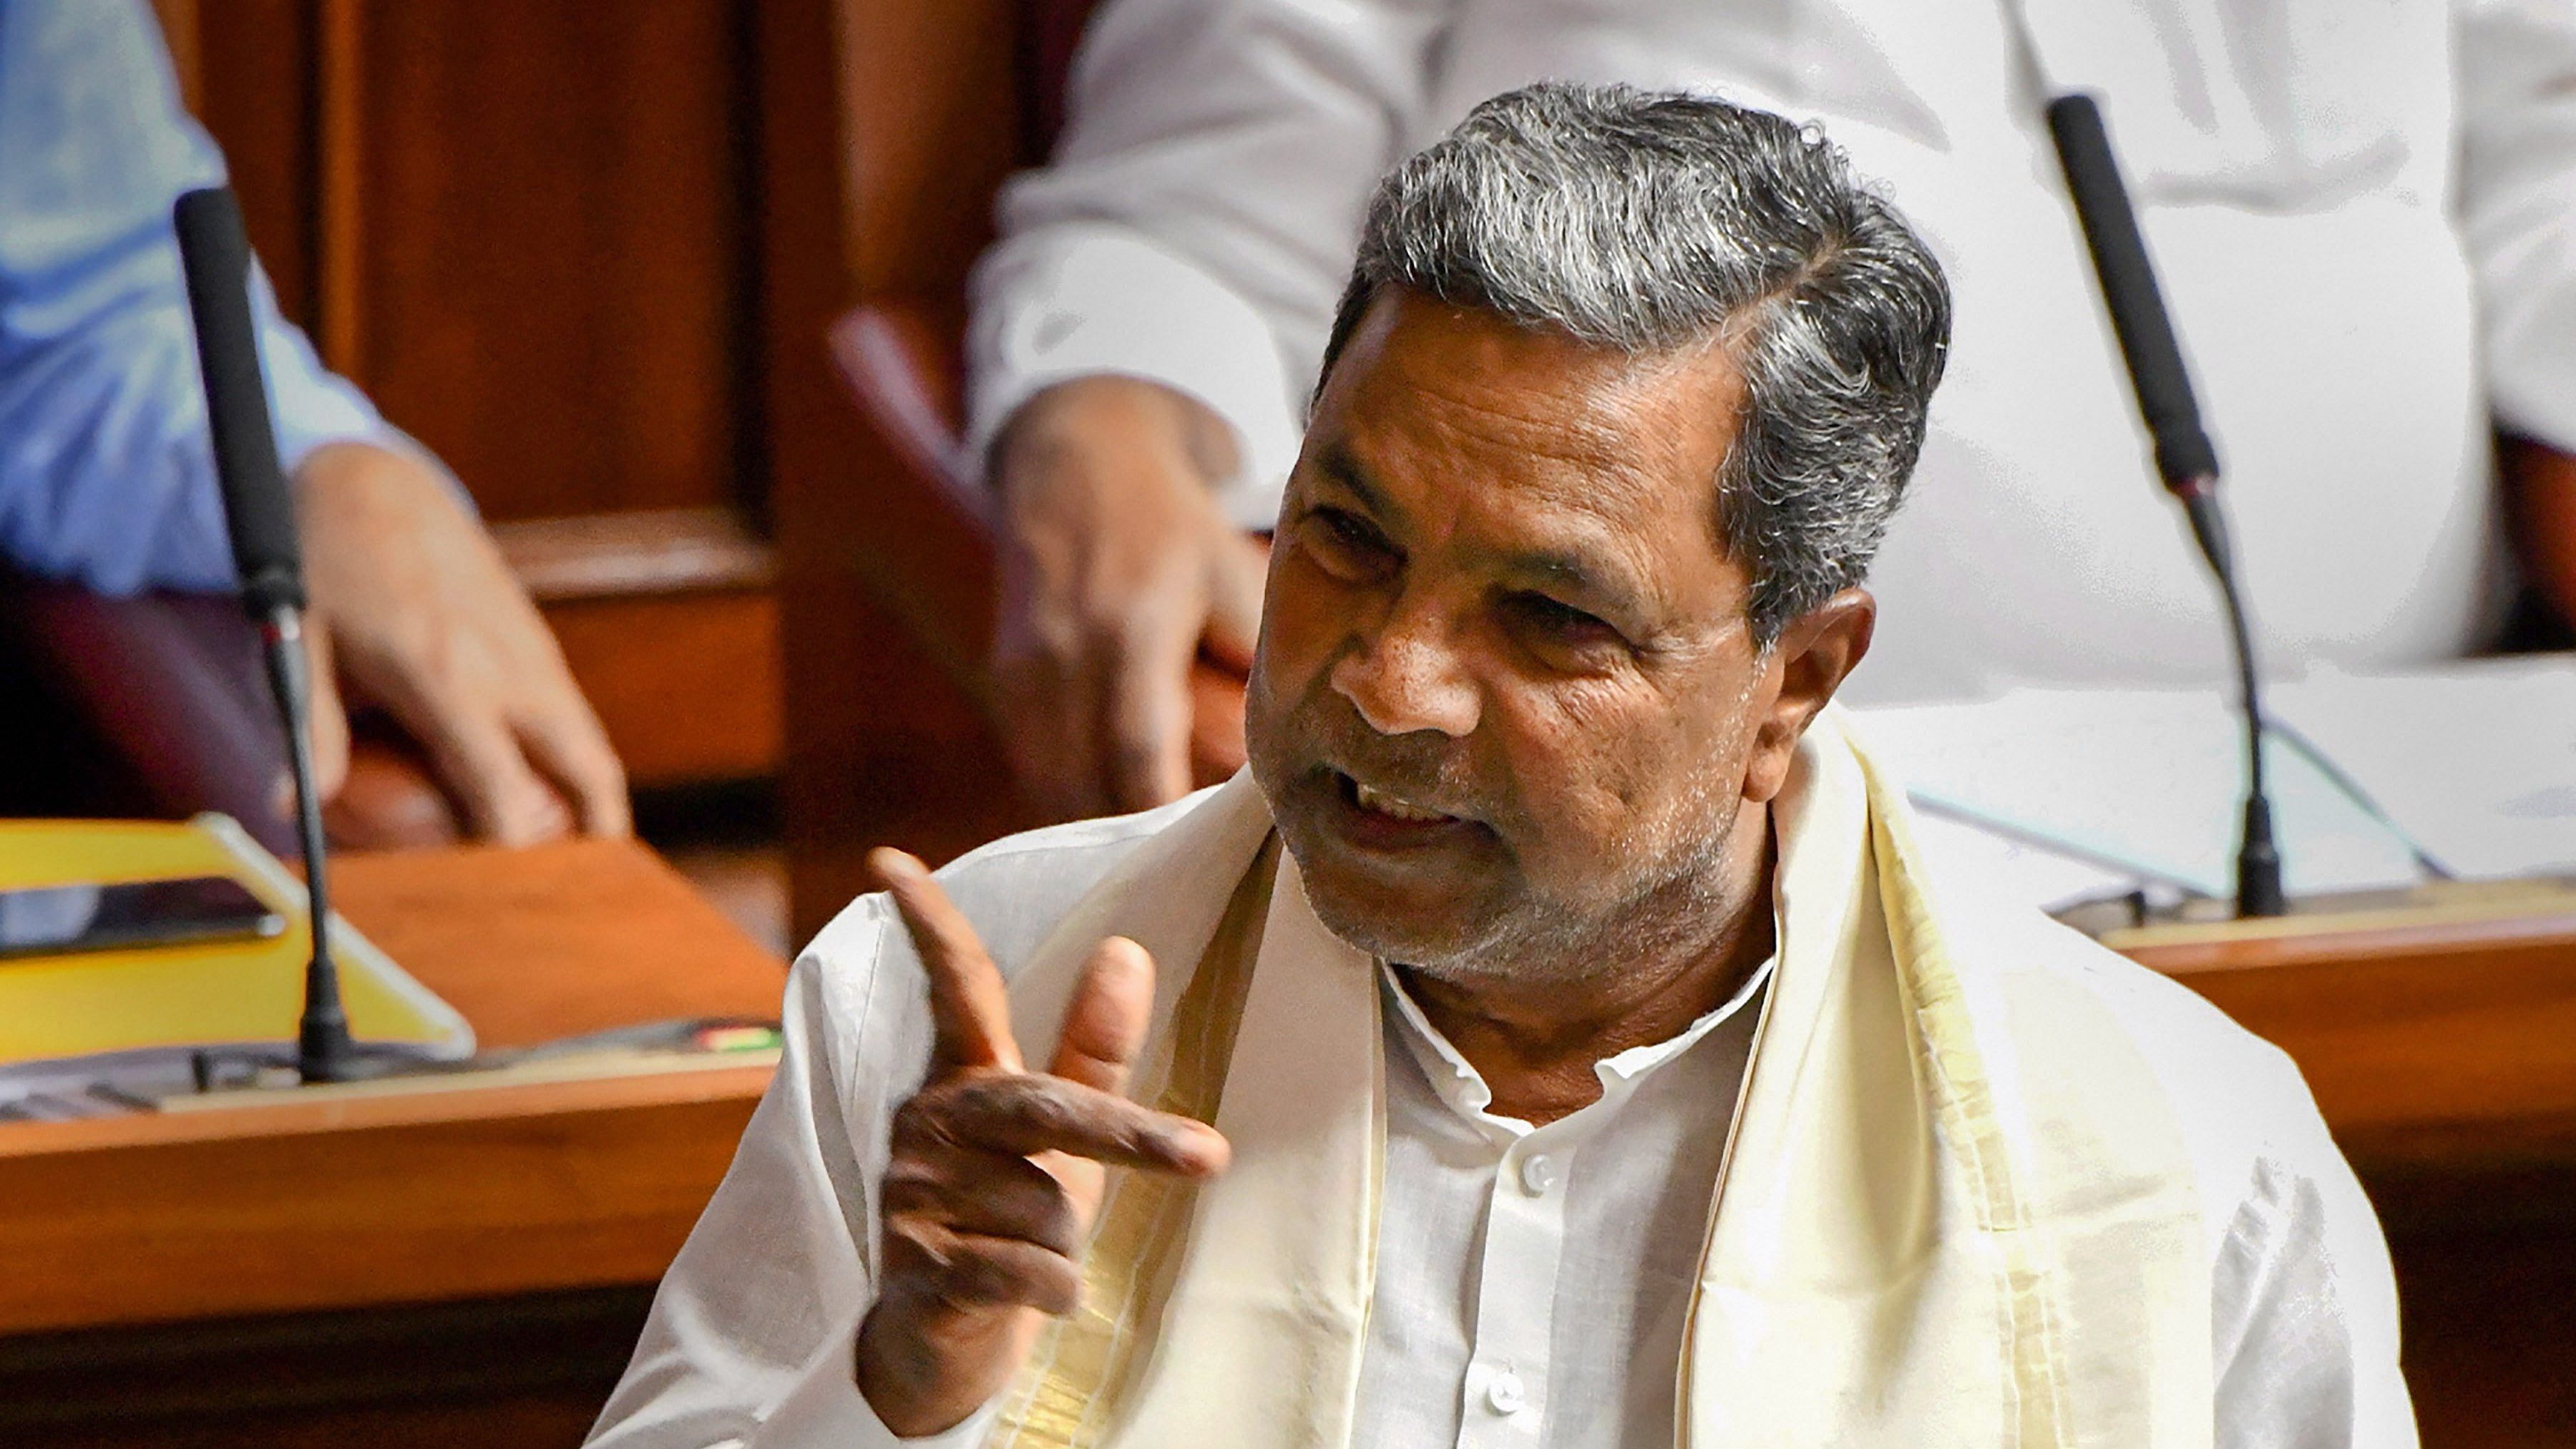 Asked if the Congress got misled by the contractors' association, Siddaramaiah said: "We haven't been misled and our protests have not gone in vain. Their allegations won't go away even if there's some internal understanding." Credit: PTI File Photo